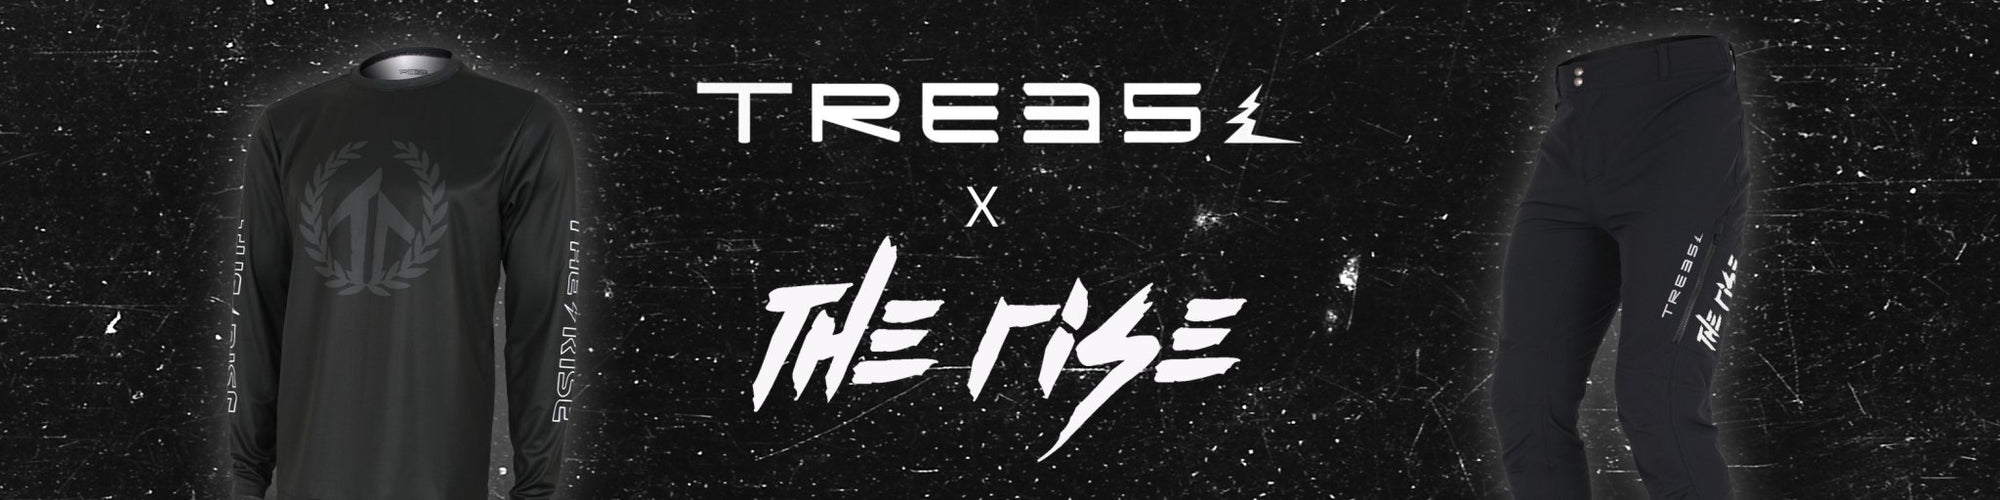 THE RISE x TREES - TREES Mountain Apparel